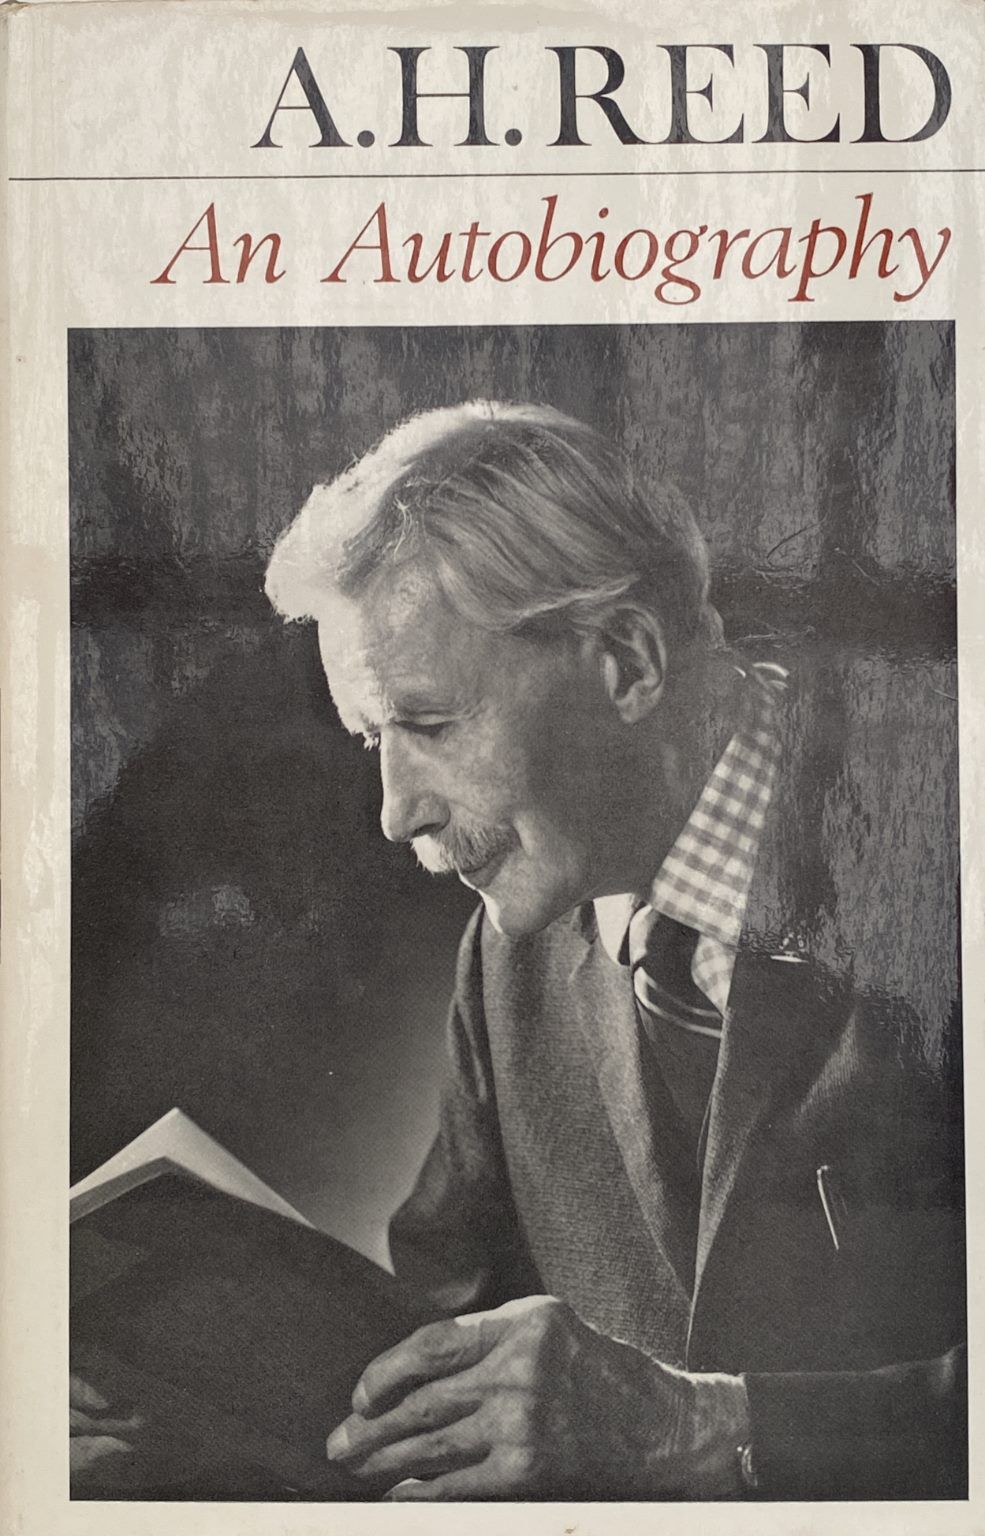 A. H. REED An Autobiography